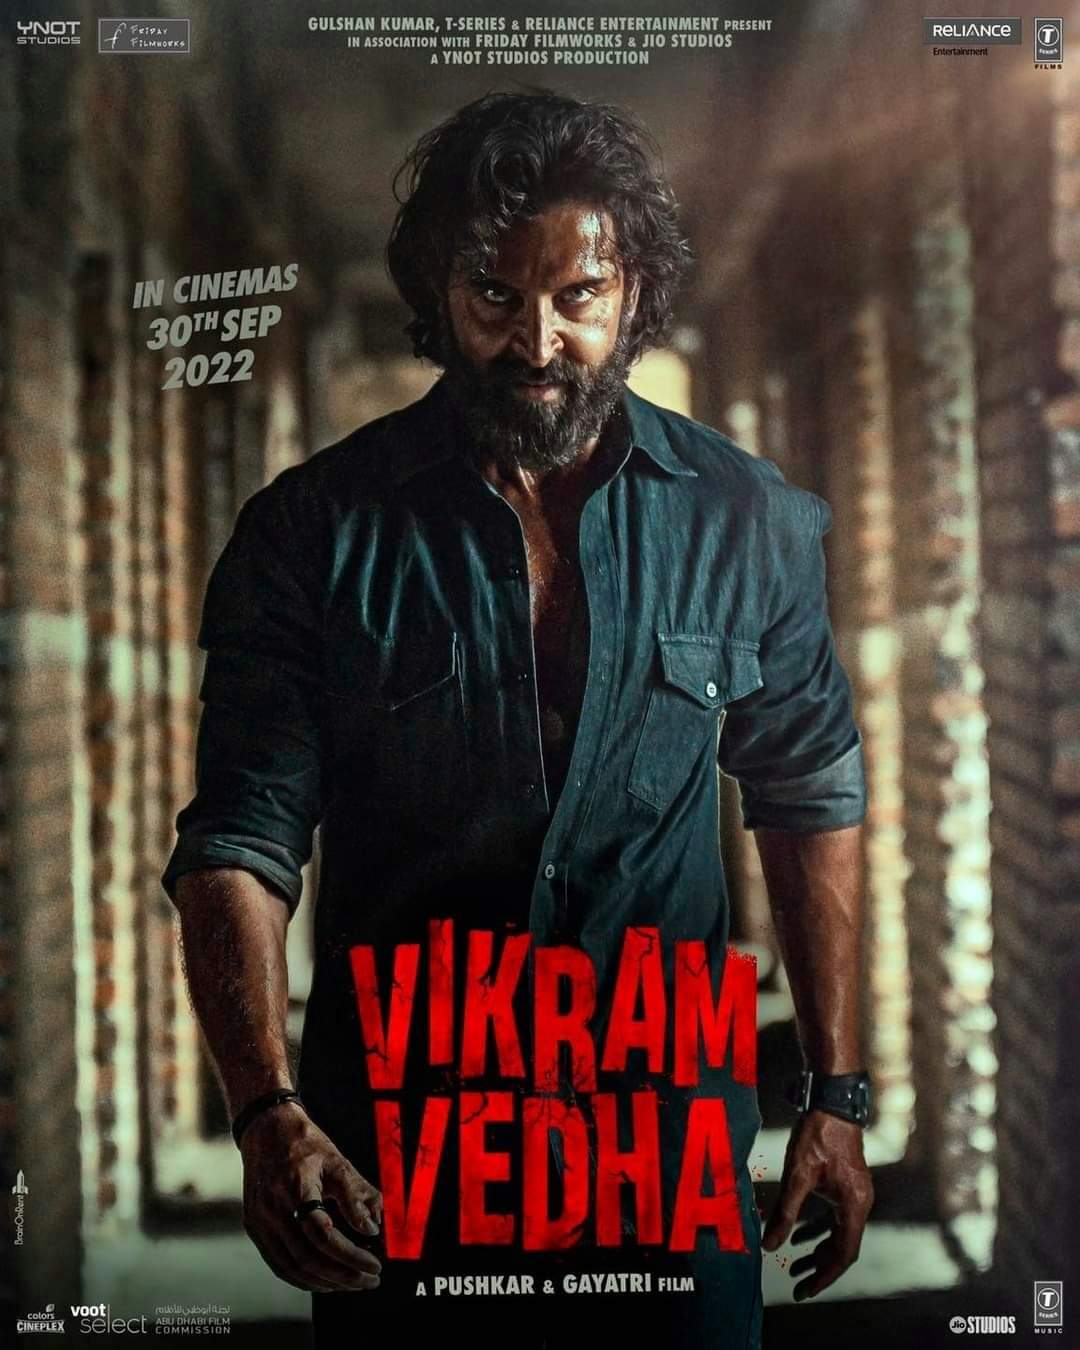 Vikram Vedha Movie Satellite TV Rights Bagged by Colors Cineplex